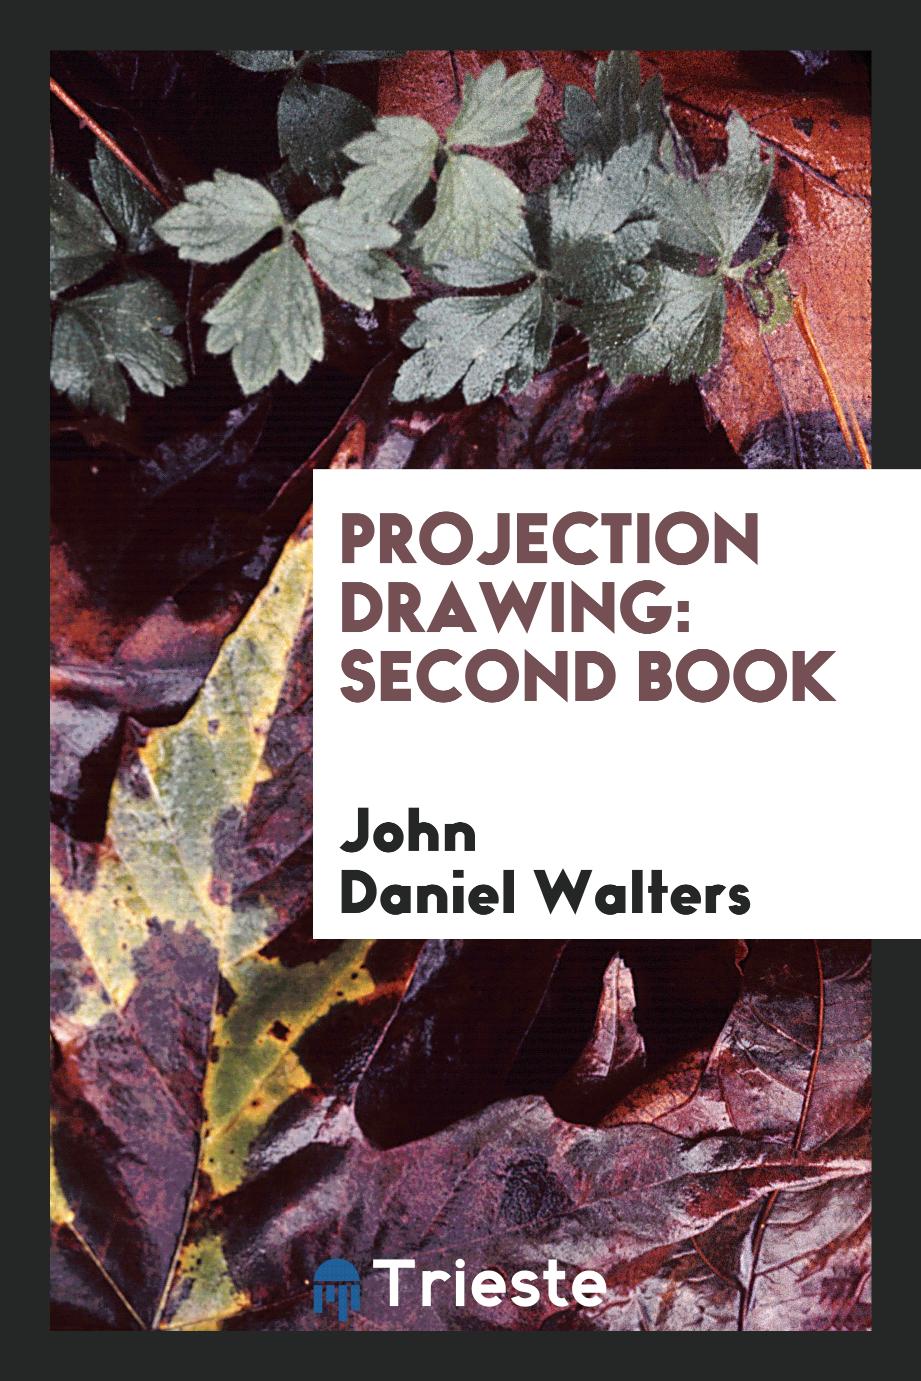 Projection Drawing: second book